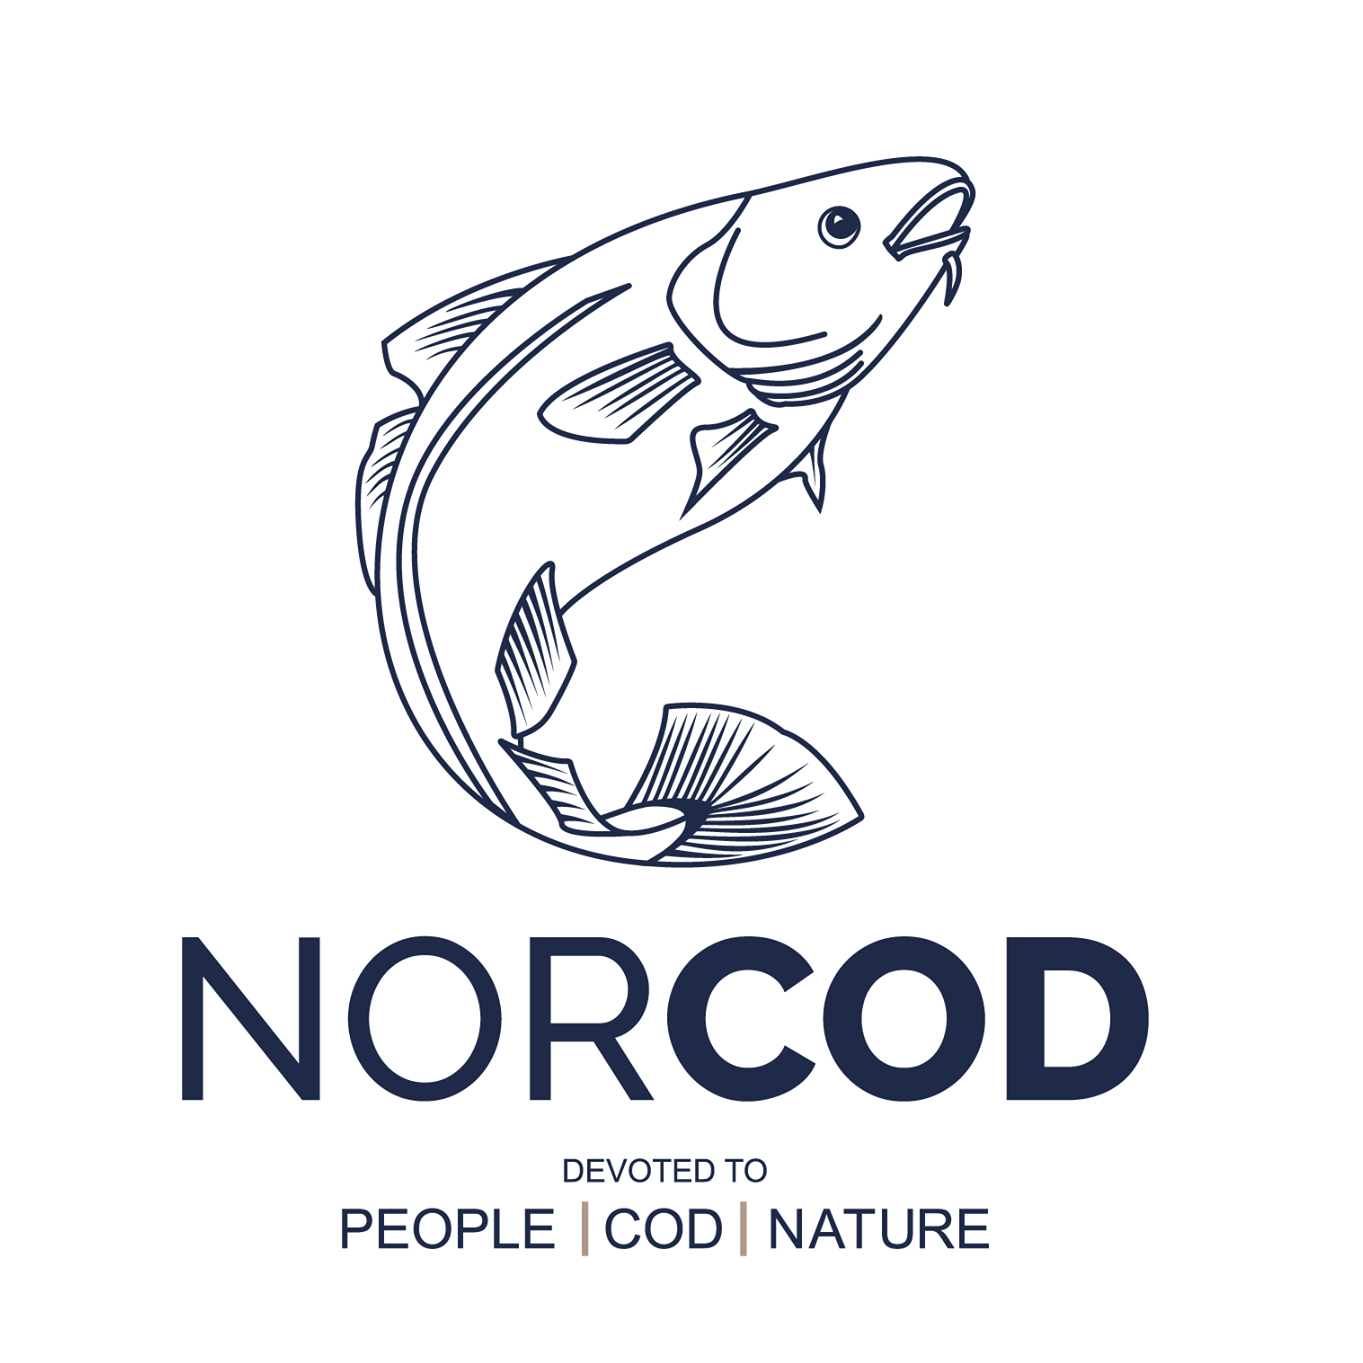 Norcod AS